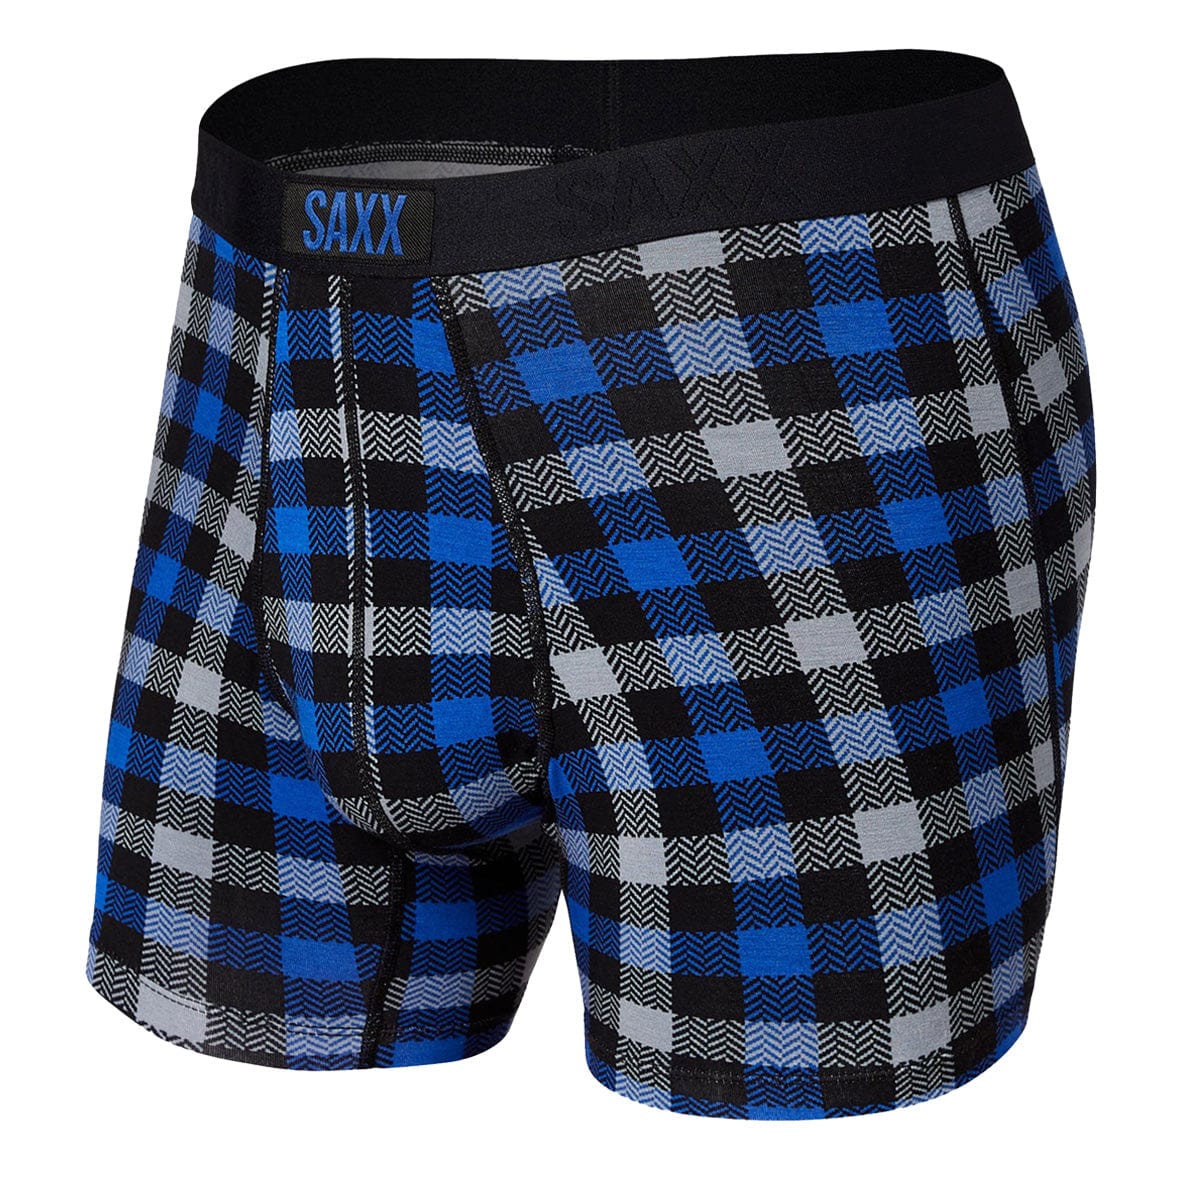 SAXX Kinetic Boxer Brief - Beyond The Usual